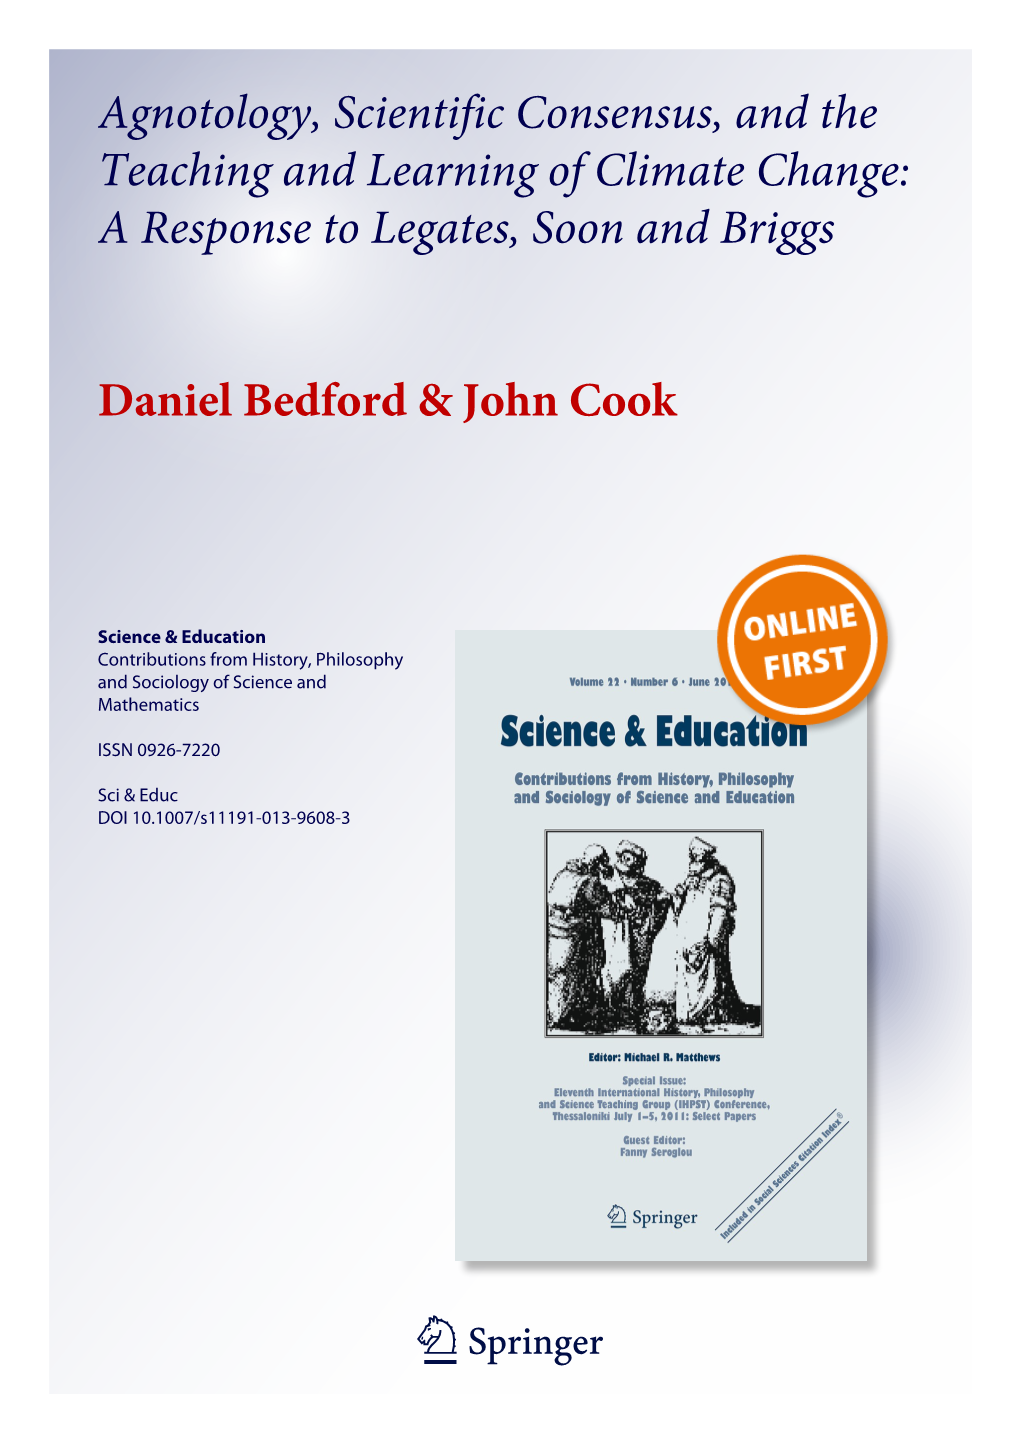 Agnotology, Scientific Consensus, and the Teaching and Learning of Climate Change: a Response to Legates, Soon and Briggs